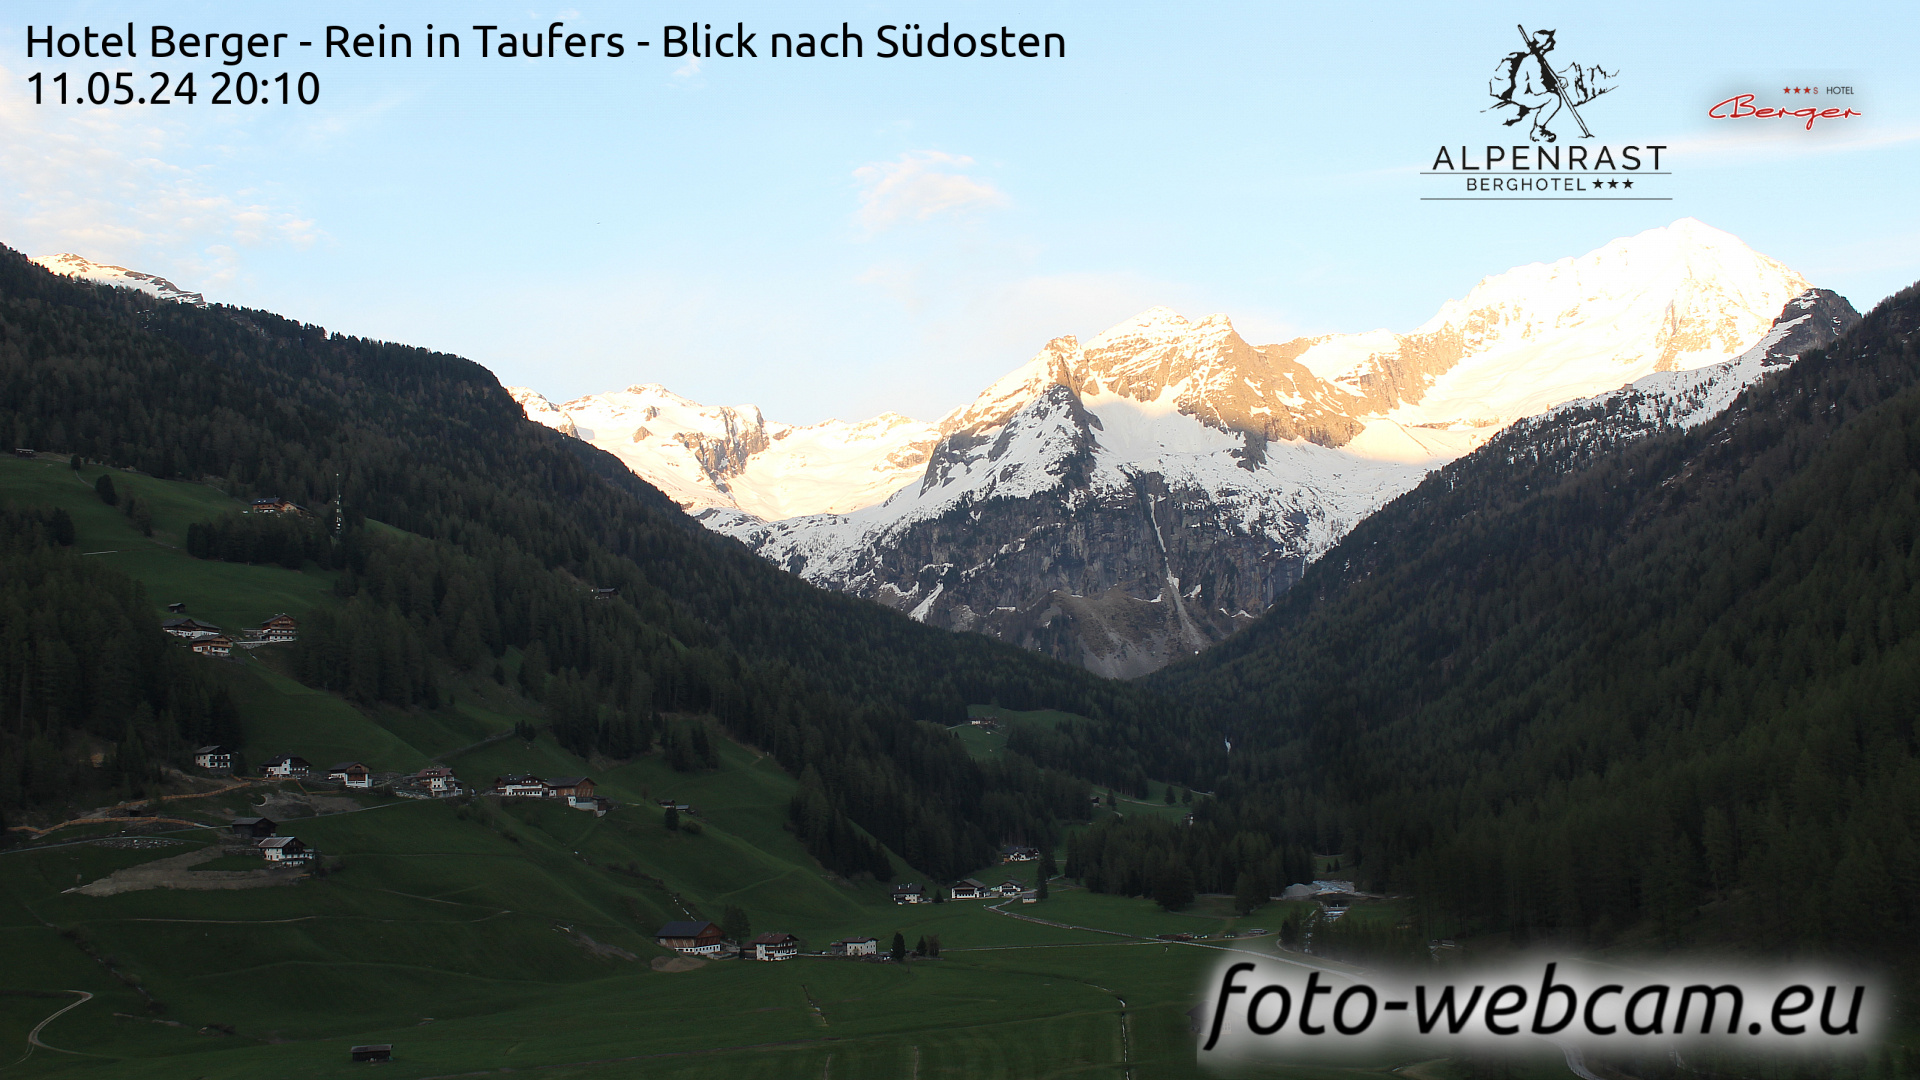 Rein in Taufers Do. 20:11